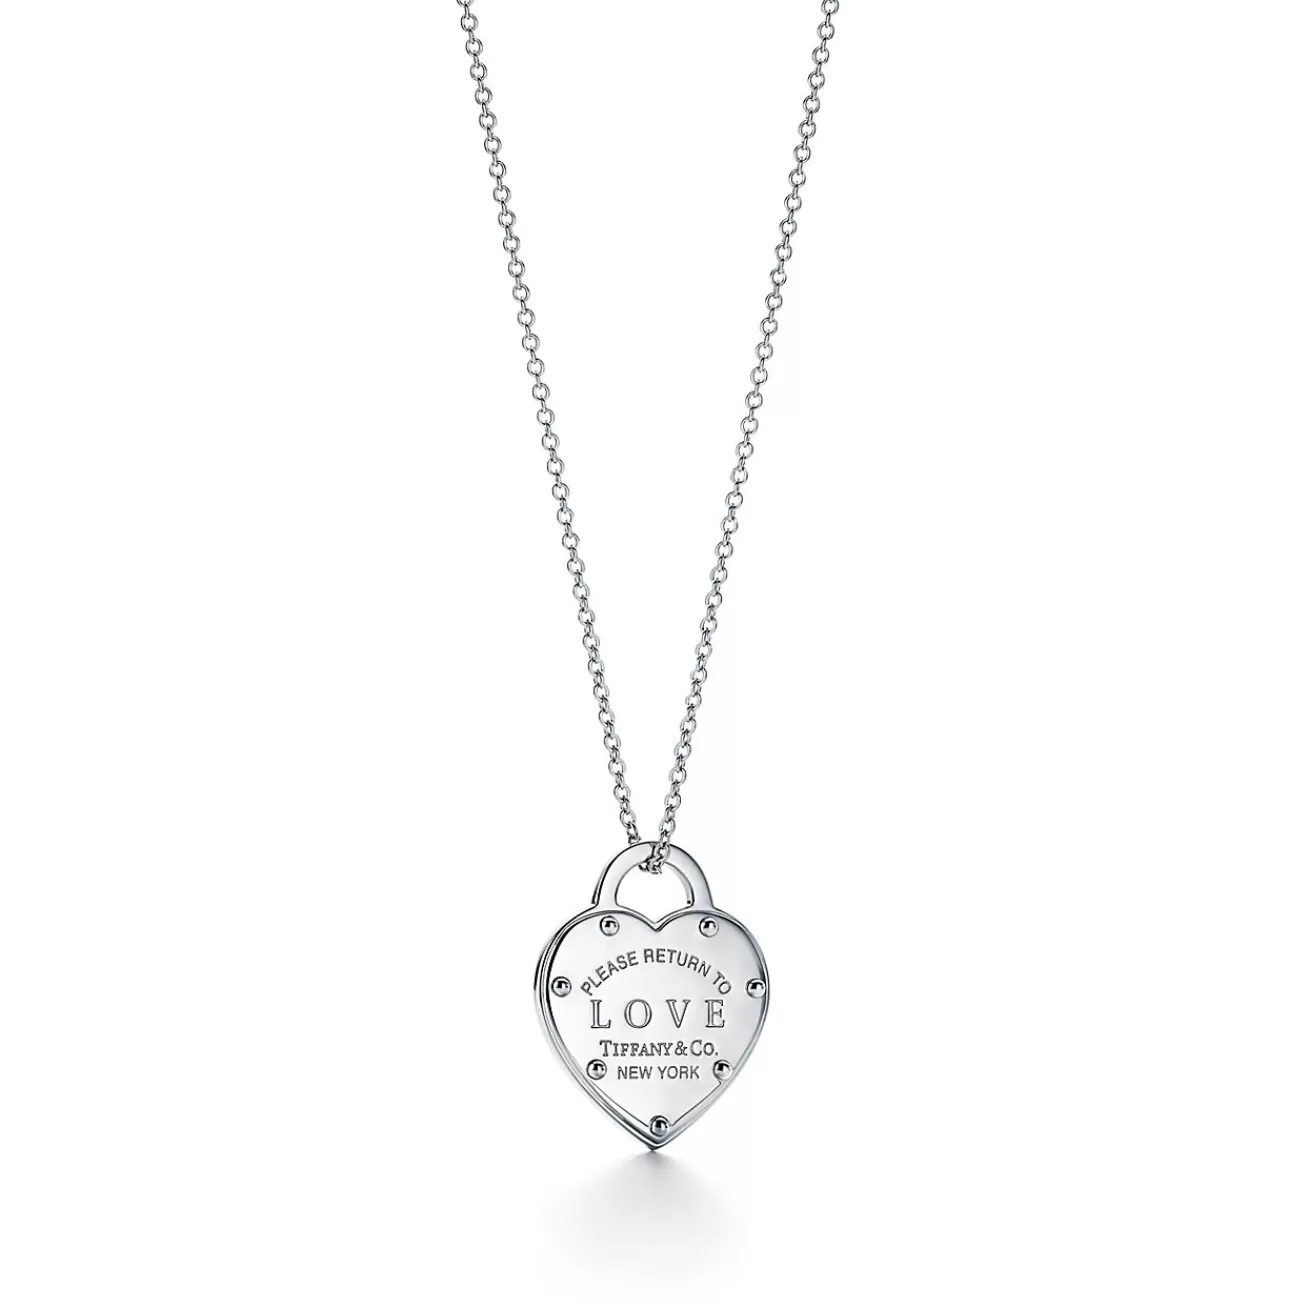 Tiffany & Co. Return to Tiffany® Sterling Silver Love Heart Pendant | | ^ Necklaces & Pendants | Sterling Silver Jewelry